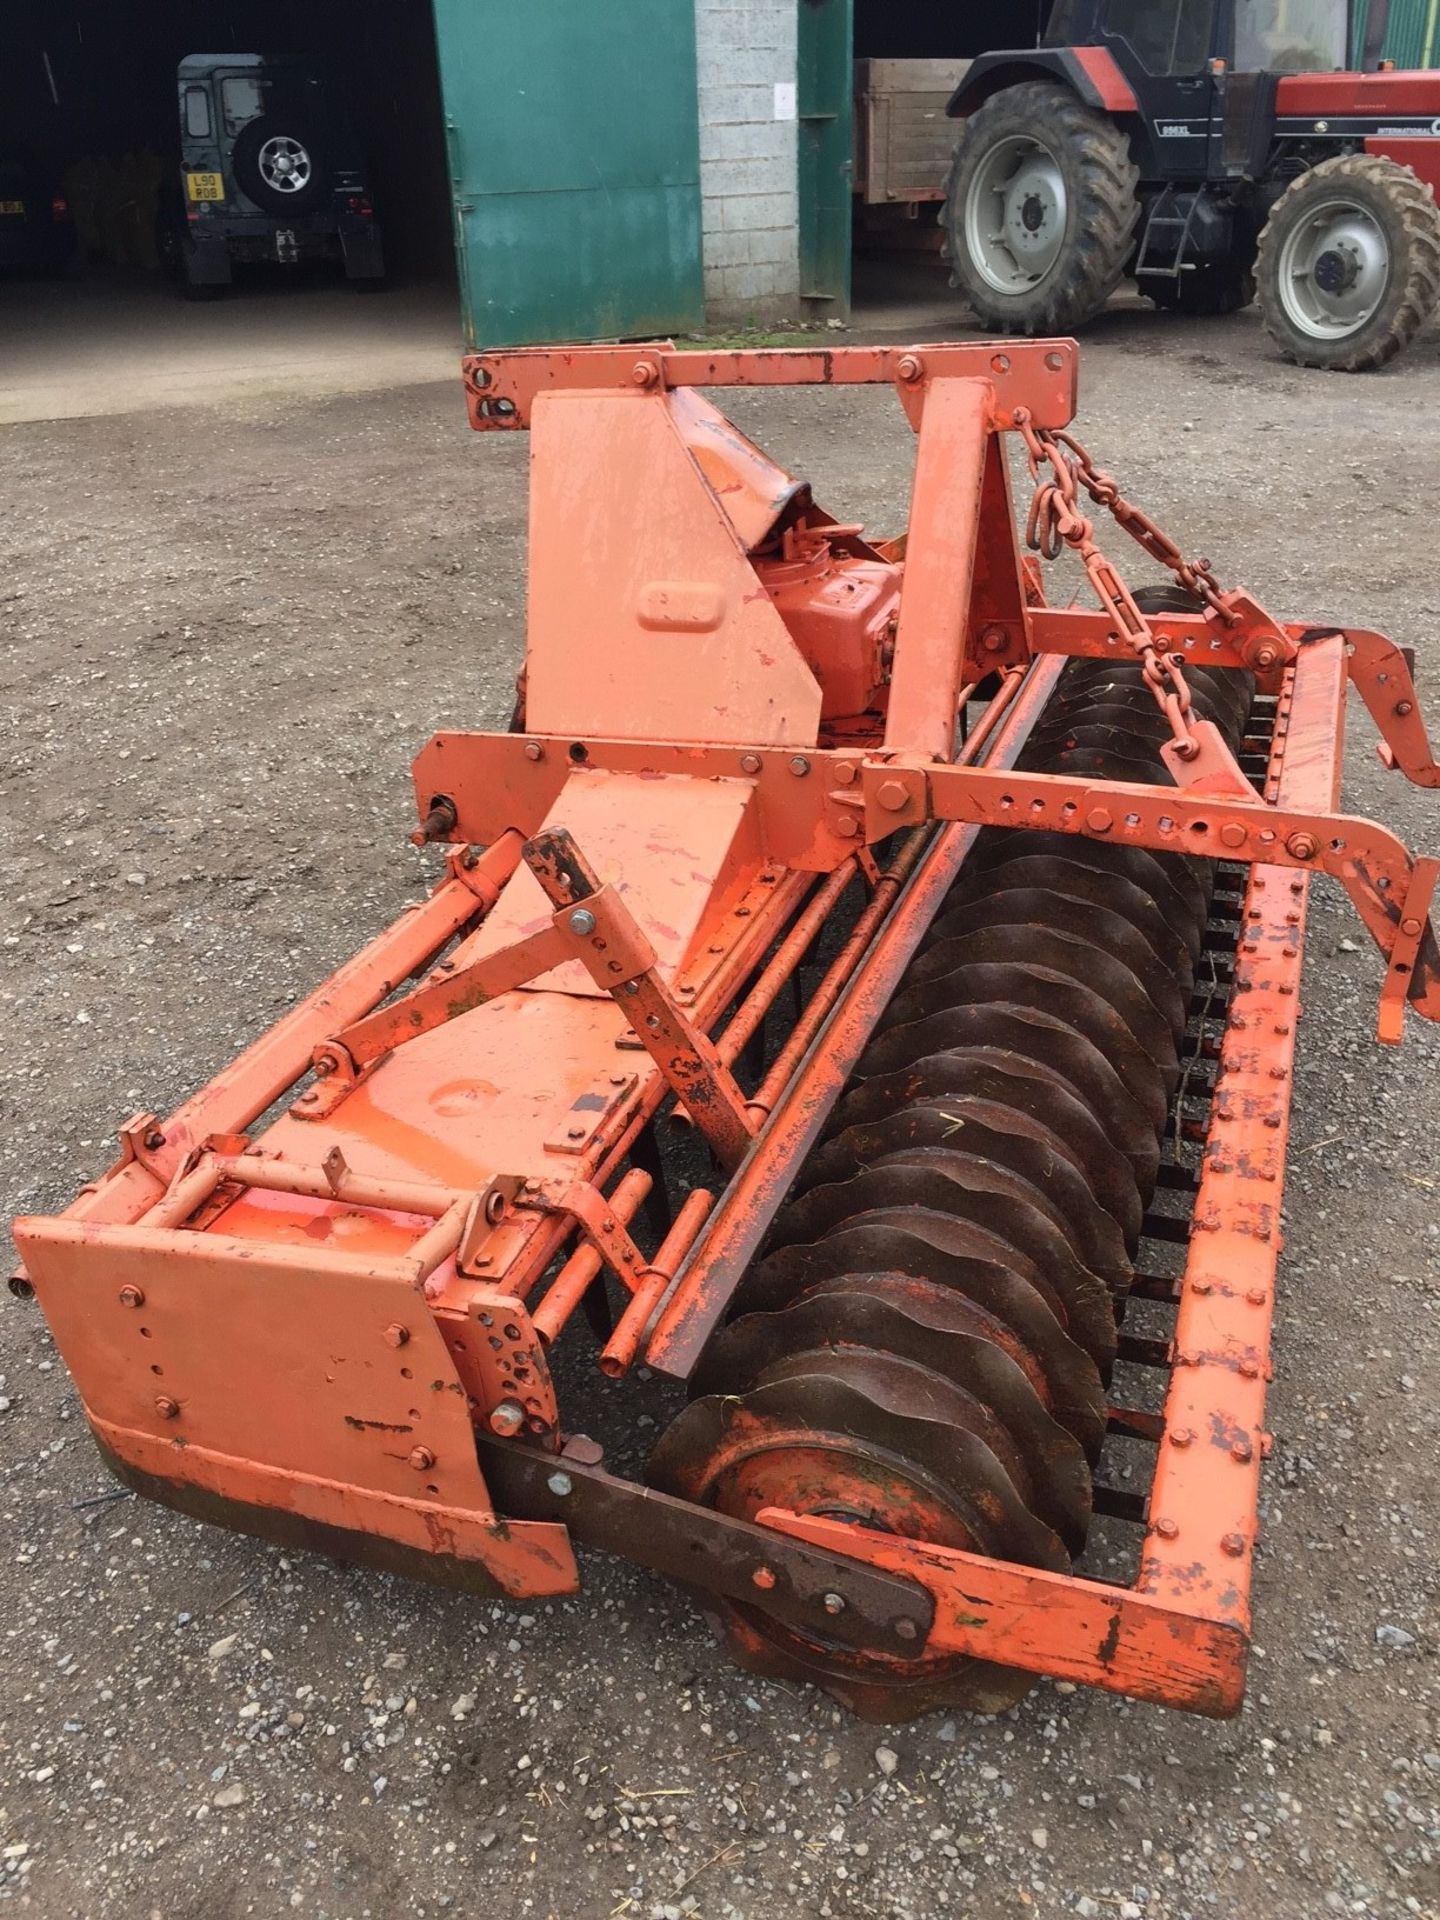 Howard 3m Power Harrow Serial Number 1773 09141 Spares and repairs,Location: Mansfield, Nottingham